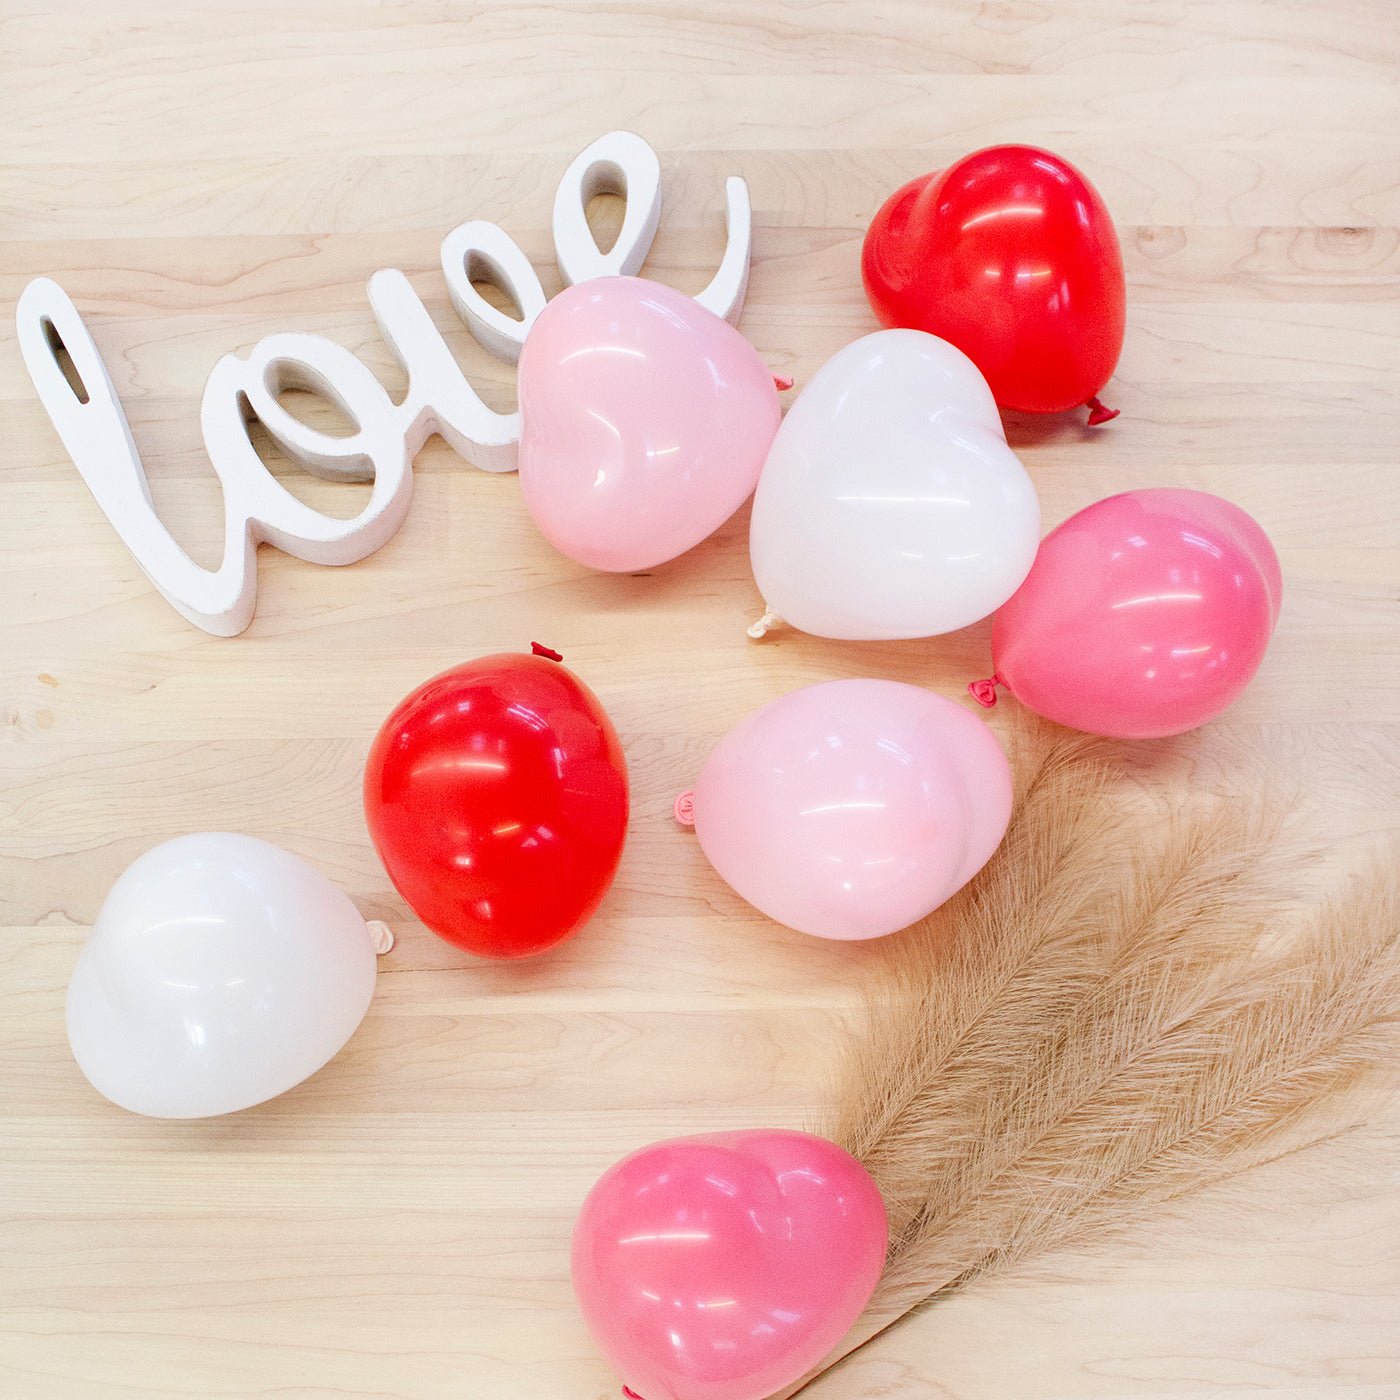 Ocean locker vegetation Assorted Mini Red Pink White Heart Balloons from Ellie's Party Supply